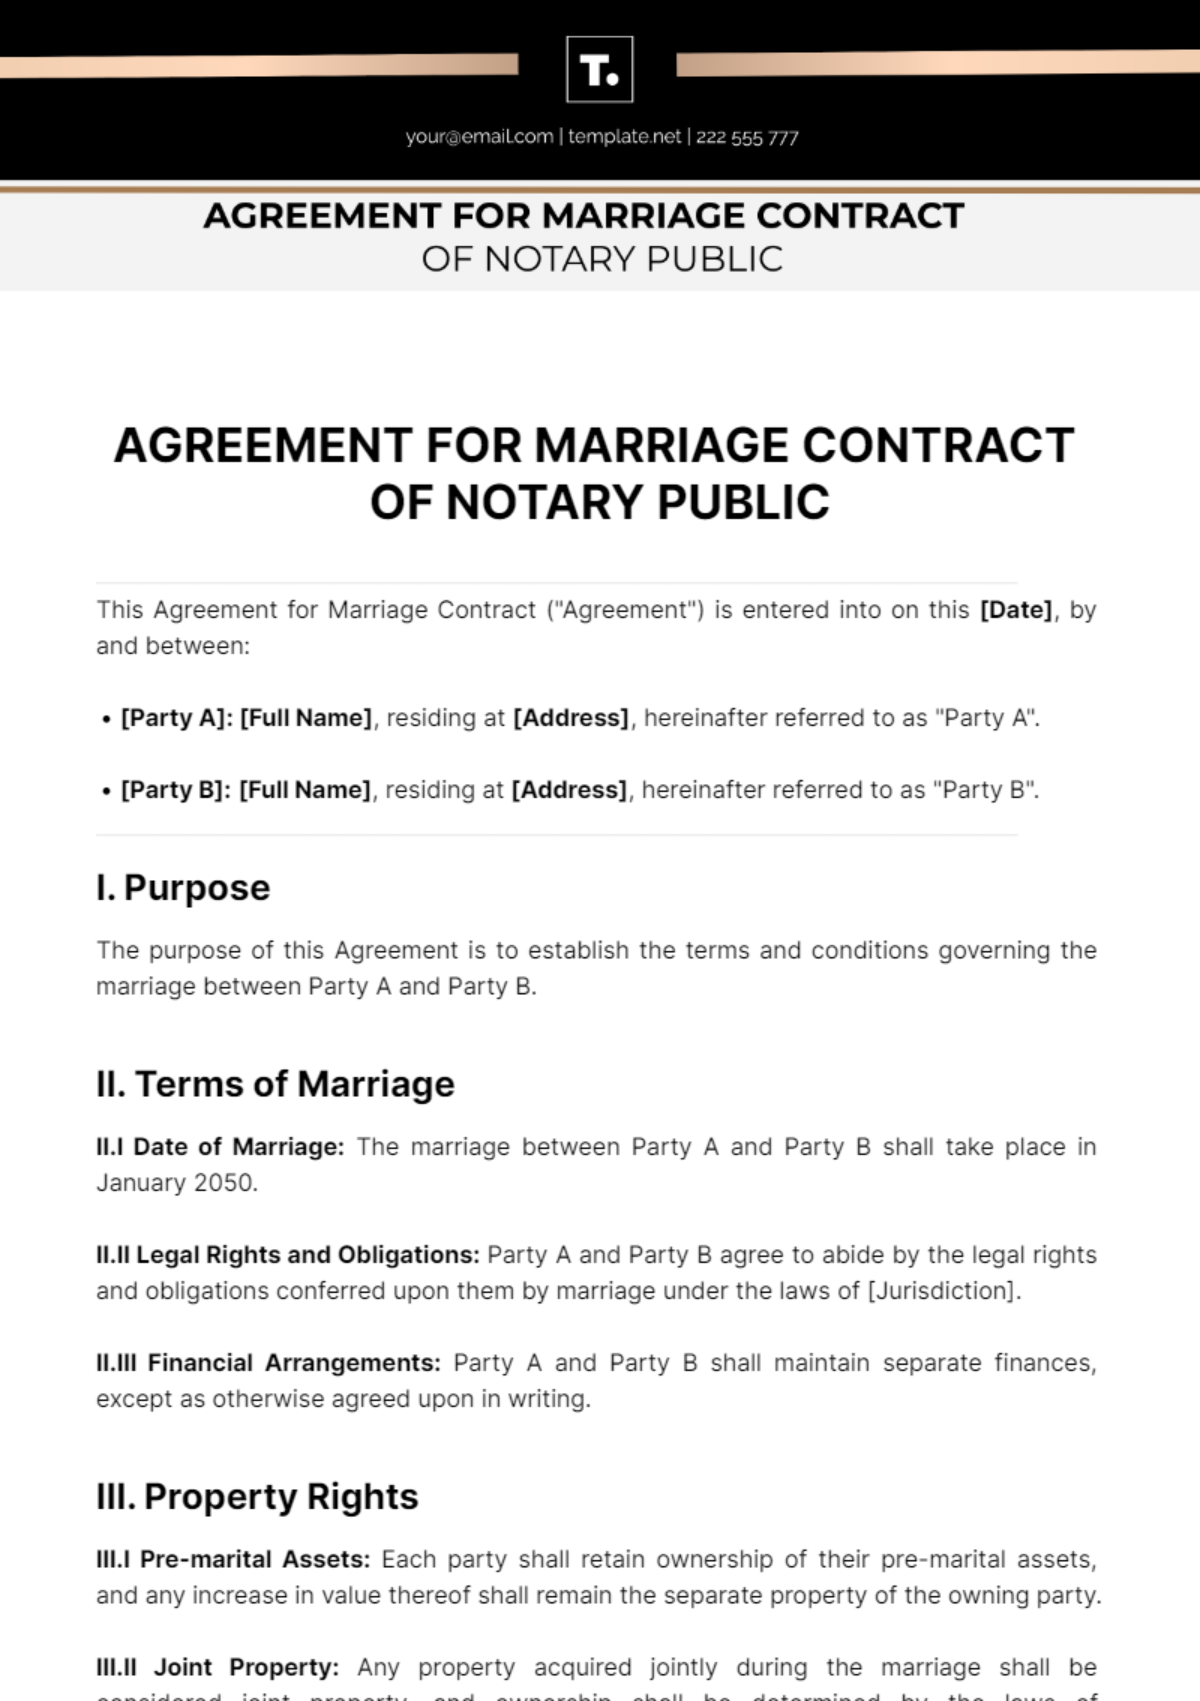 Agreement For Marriage Contract Of Notary Public Template